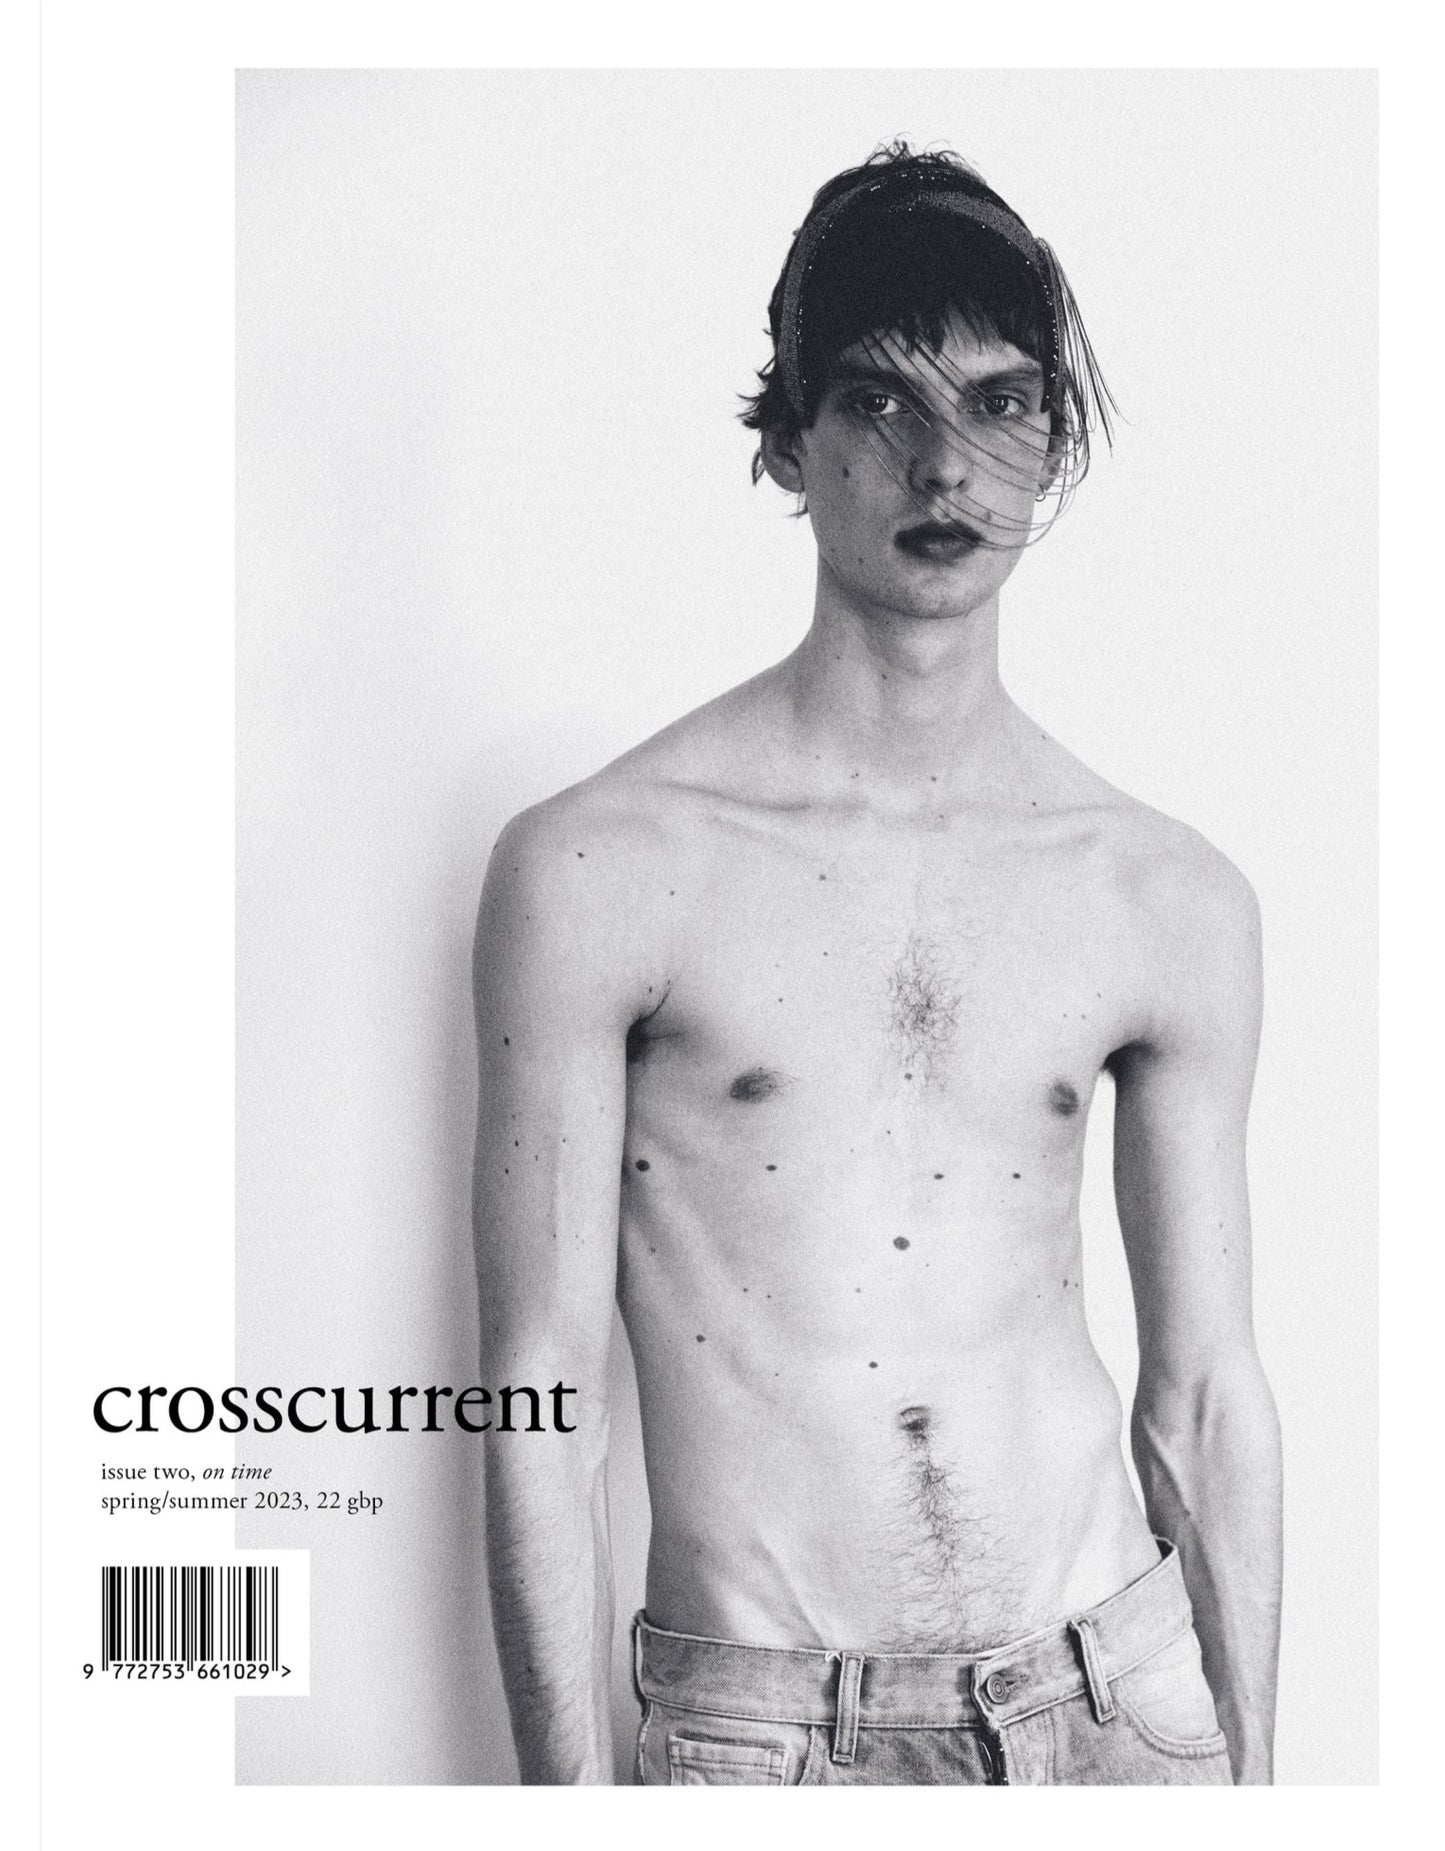 crosscurrent - Issue 2 